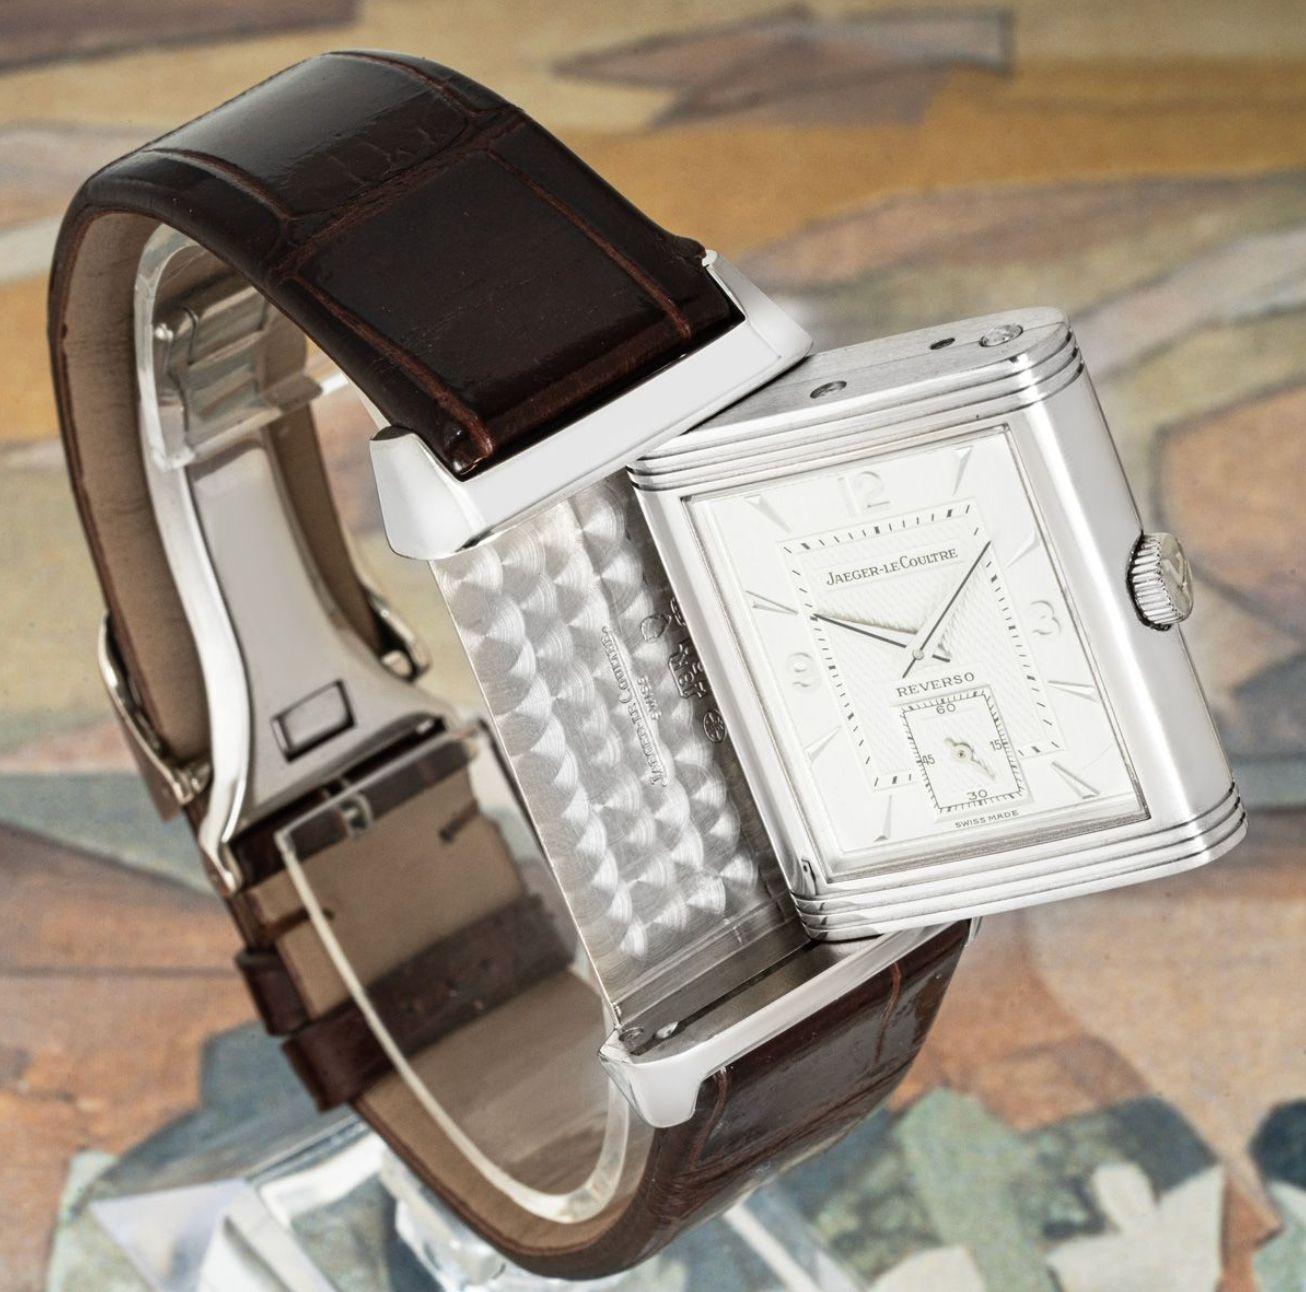 A 26mm Jaeger LeCoultre Reverso Juventus Limited Edition in white gold. Featuring a silver guilloche dial, with arabic applied numbers, a small seconds sub-dial and a reversible side which features an engraved writing of 'Juvecentus 100 1897-1997